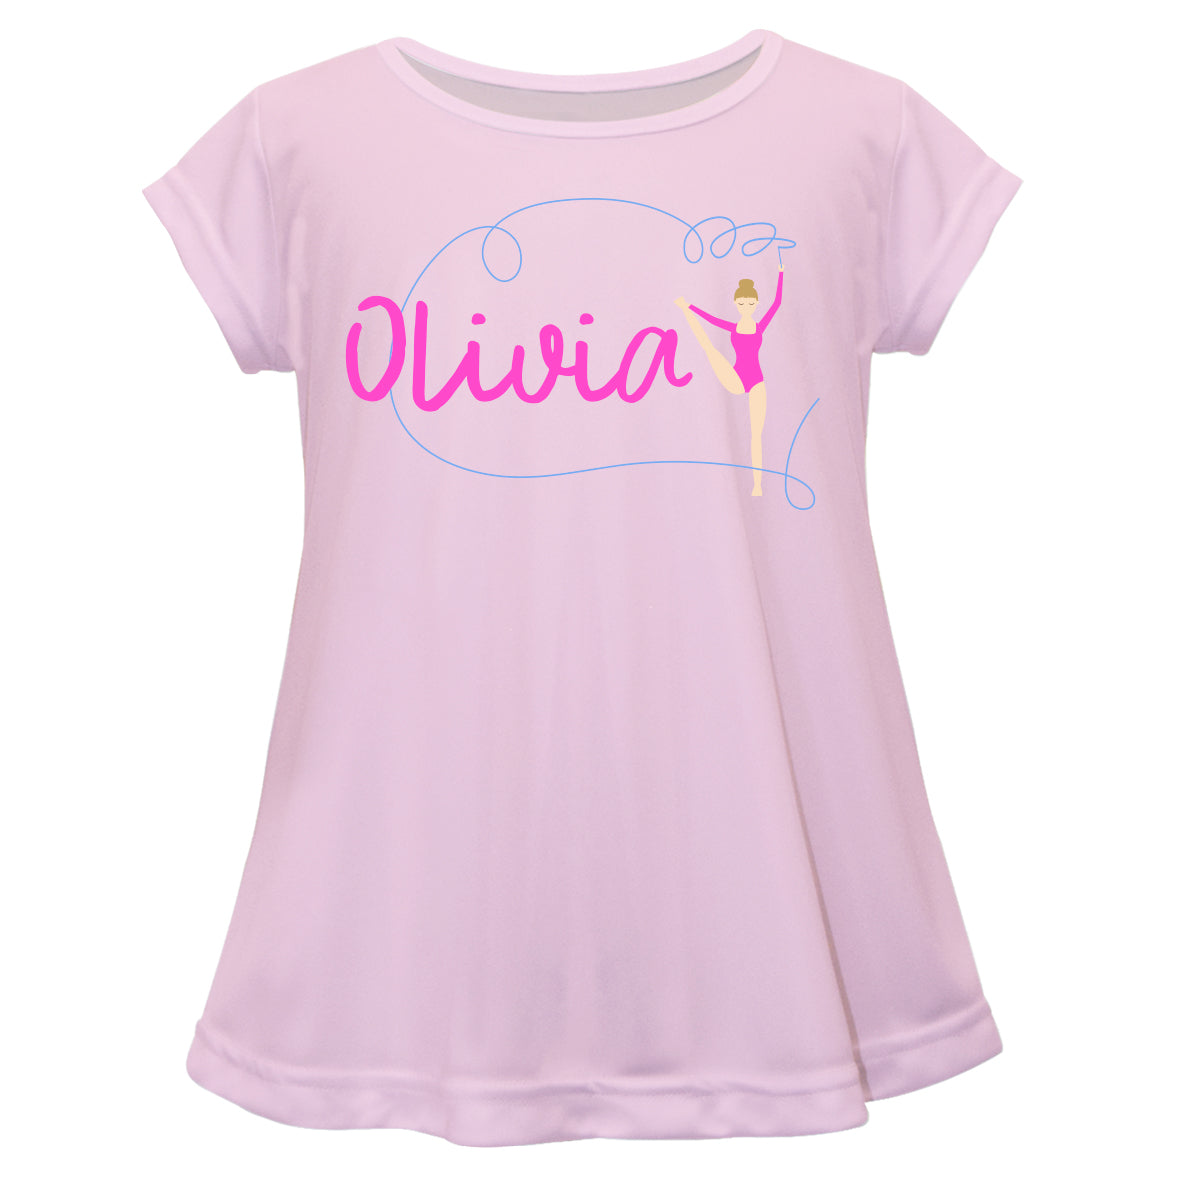 Gymnast Name Pink Short Sleeve Laurie Top - Wimziy&Co.